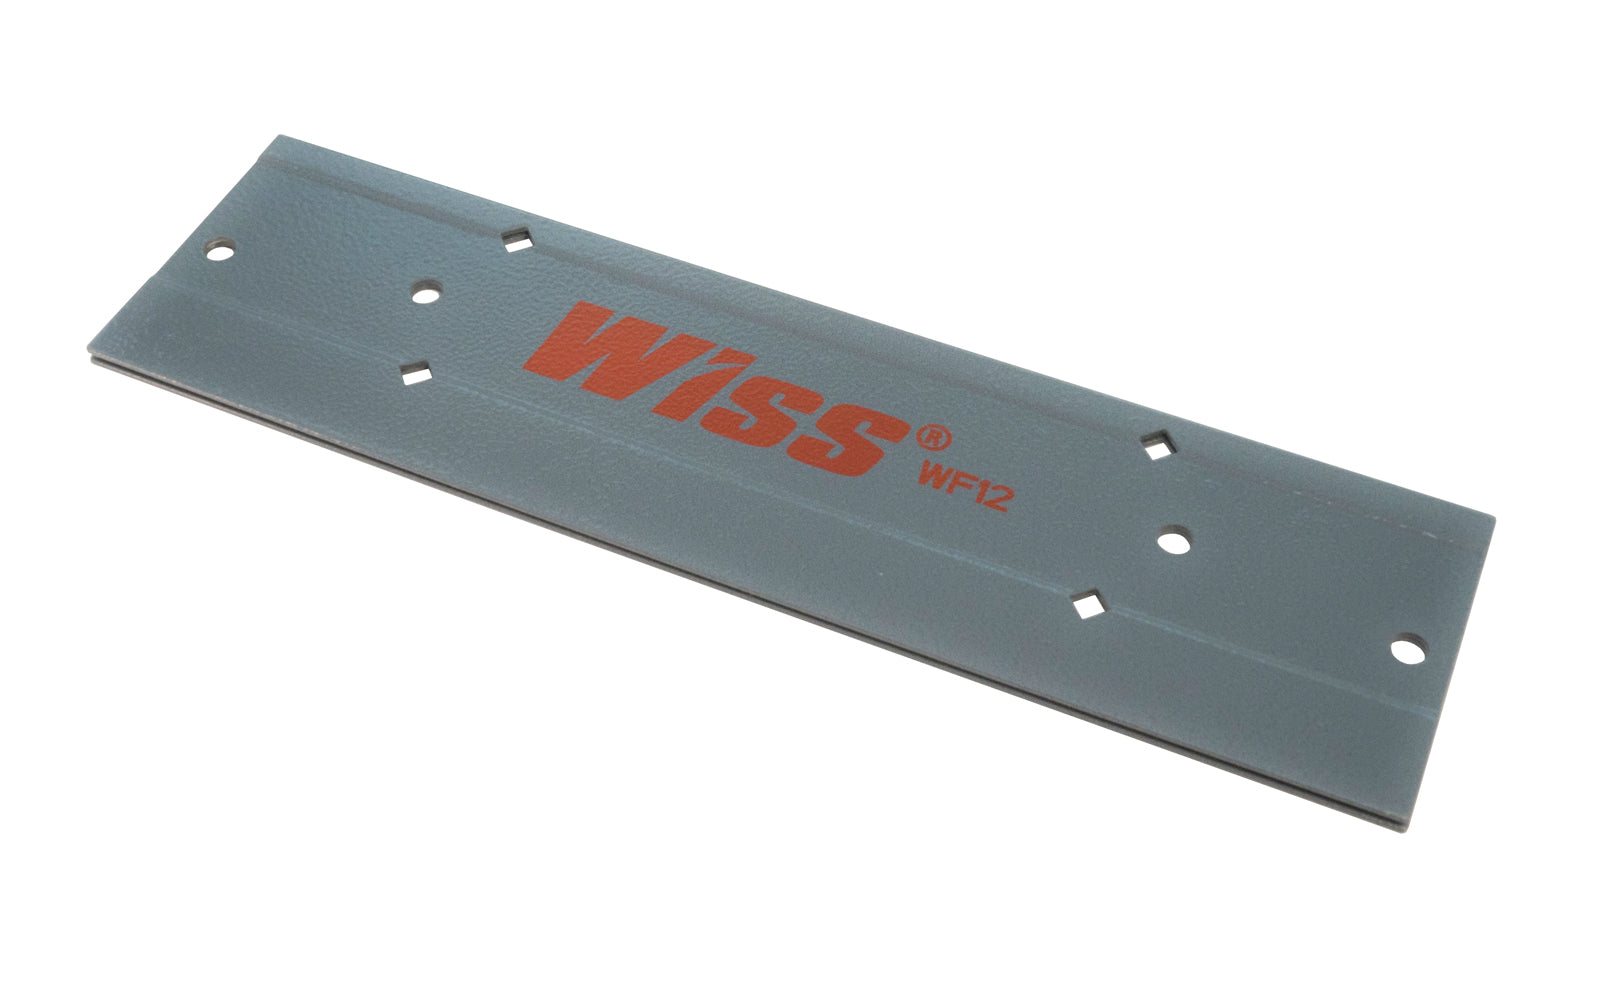 Wiss 12" Steel Metal Folding Tool. The Crescent Wiss Folding Tool is a powerful tool for bending or flattening sheet metal by hand. It utilizes two throat depths for varying applications.